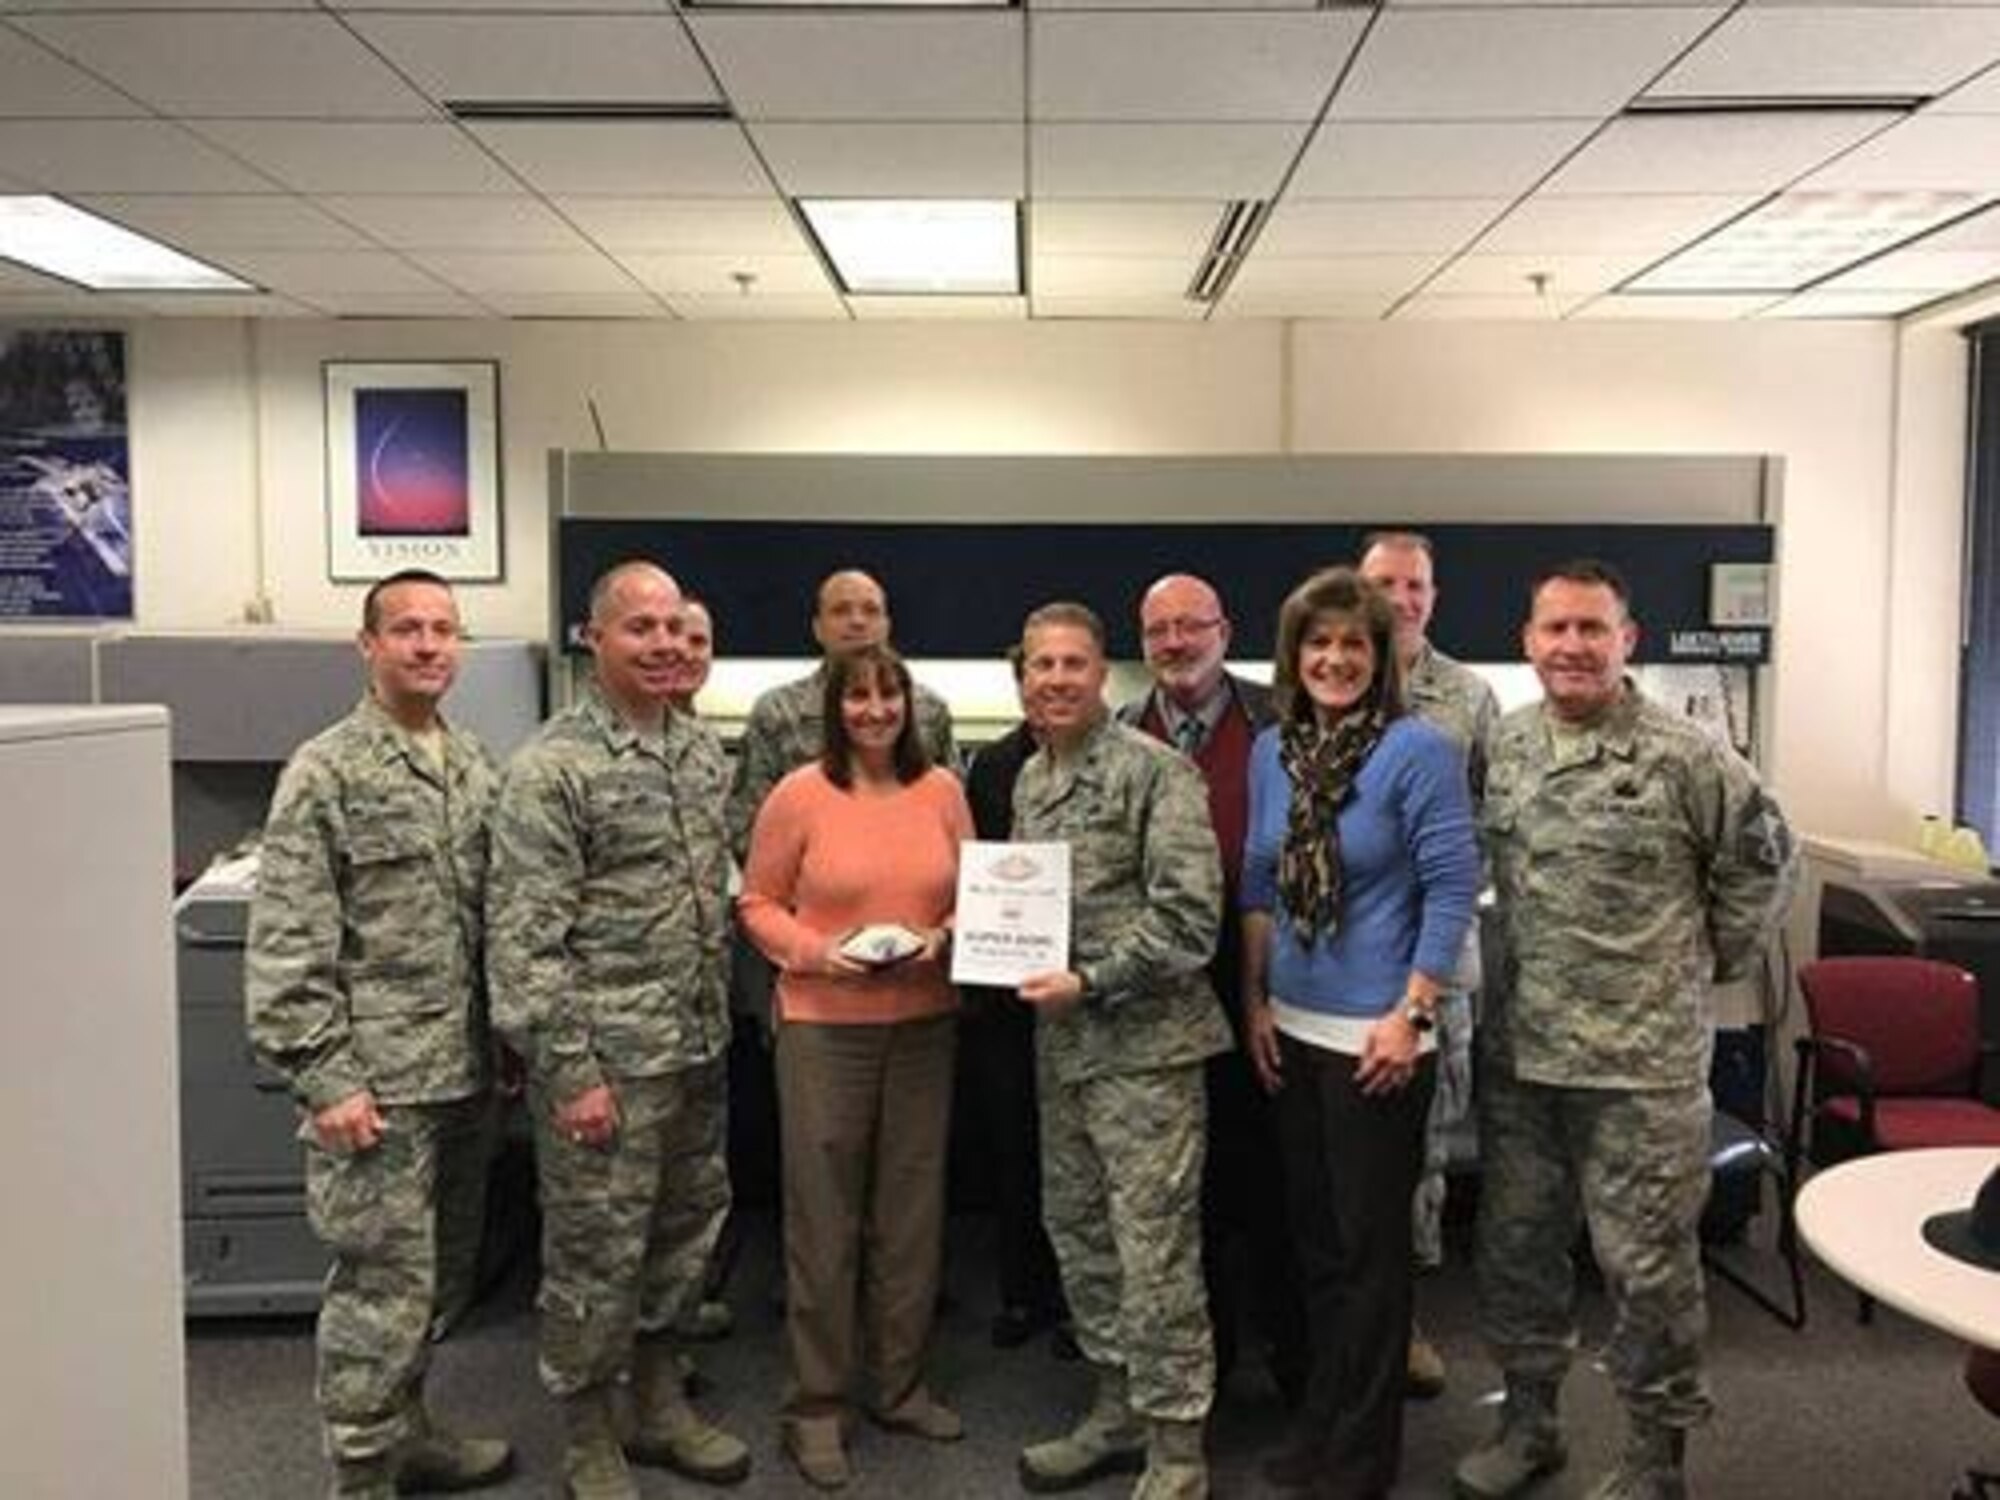 Marsha Nelson, a budget and accounting technician with the 20th Comptroller Squadron at Shaw Air Force Base, South Carolina, will be going to Super Bowl LI on Feb. 5 in Houston. Nelson, an Air Force Club member who was one of two grand prize winners of the Air Force Services Activity’s “Football Frenzy” contest, hopes the New England Patriots will beat the Atlanta Falcons. (Courtesy photo) 